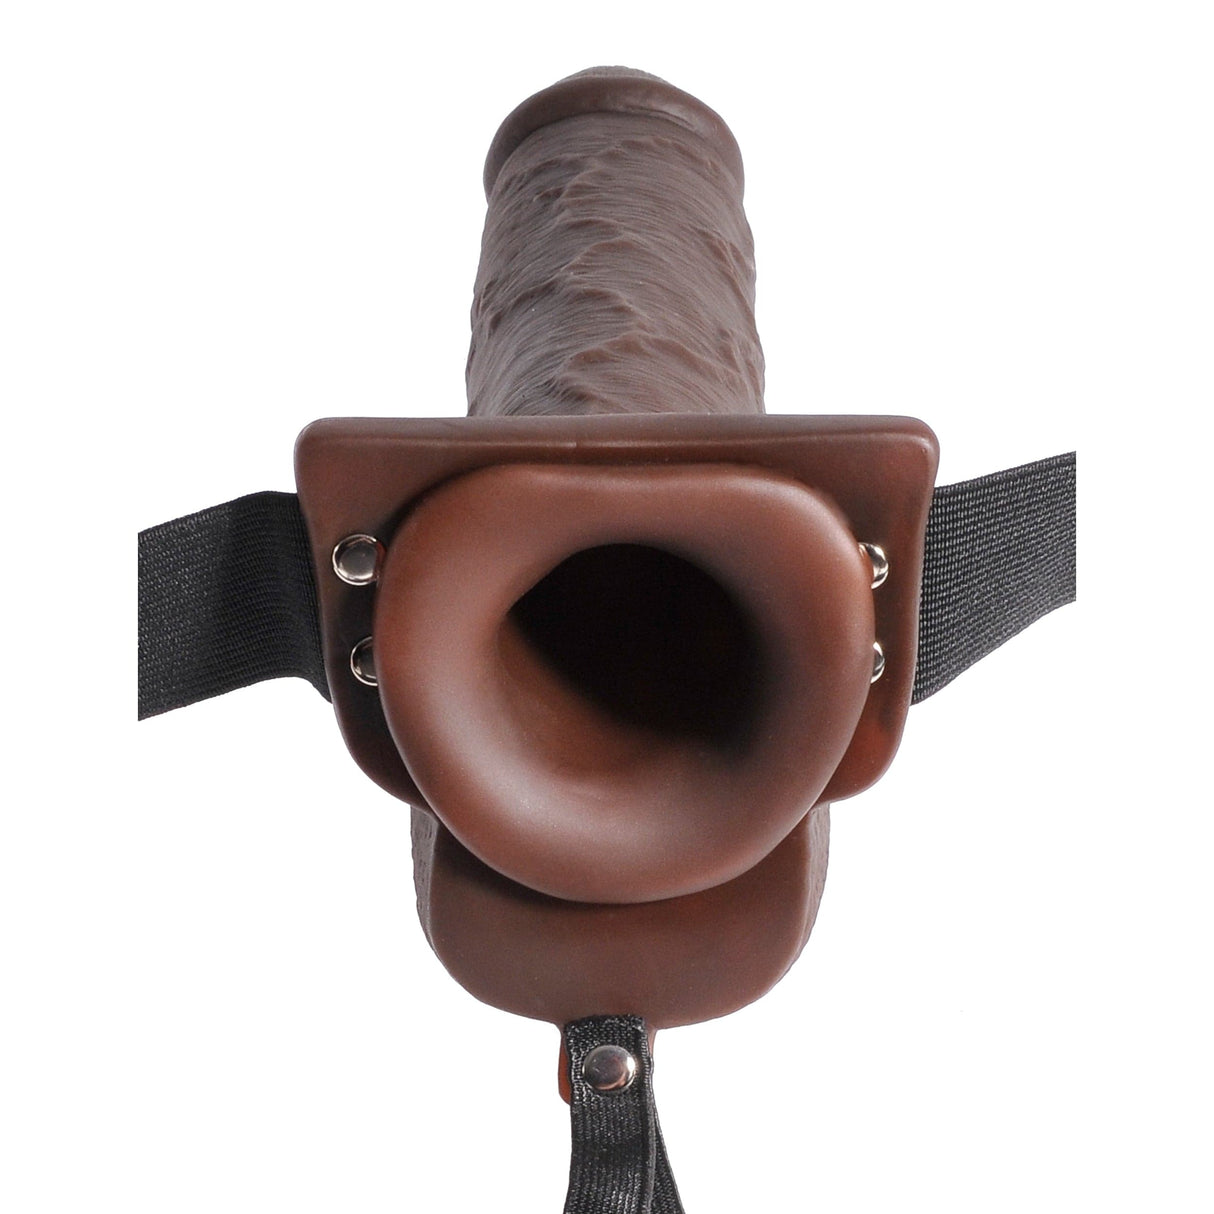 Pipedream - Fetish Fantasy Series Hollow Squirting Strap On Dildo with Balls 9" (Brown) PD2047 CherryAffairs